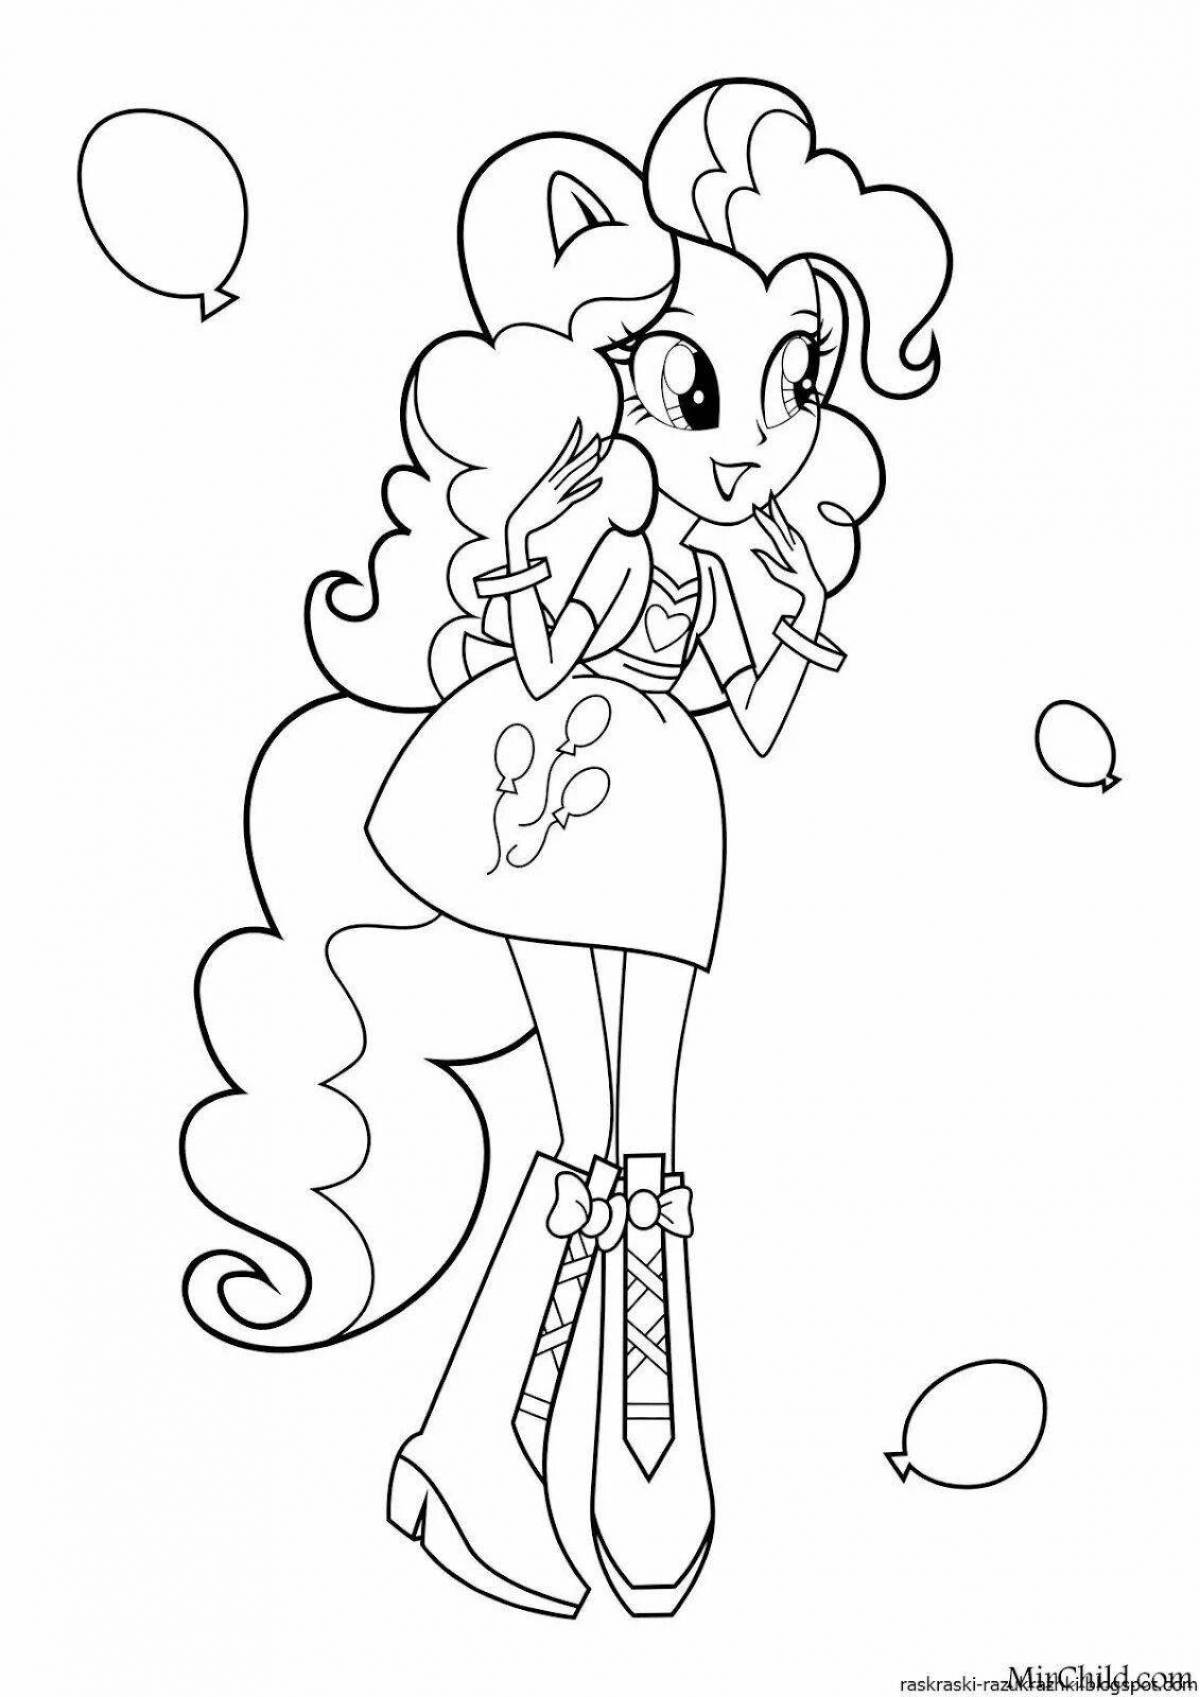 Pinkie Pie fairy coloring page for girls